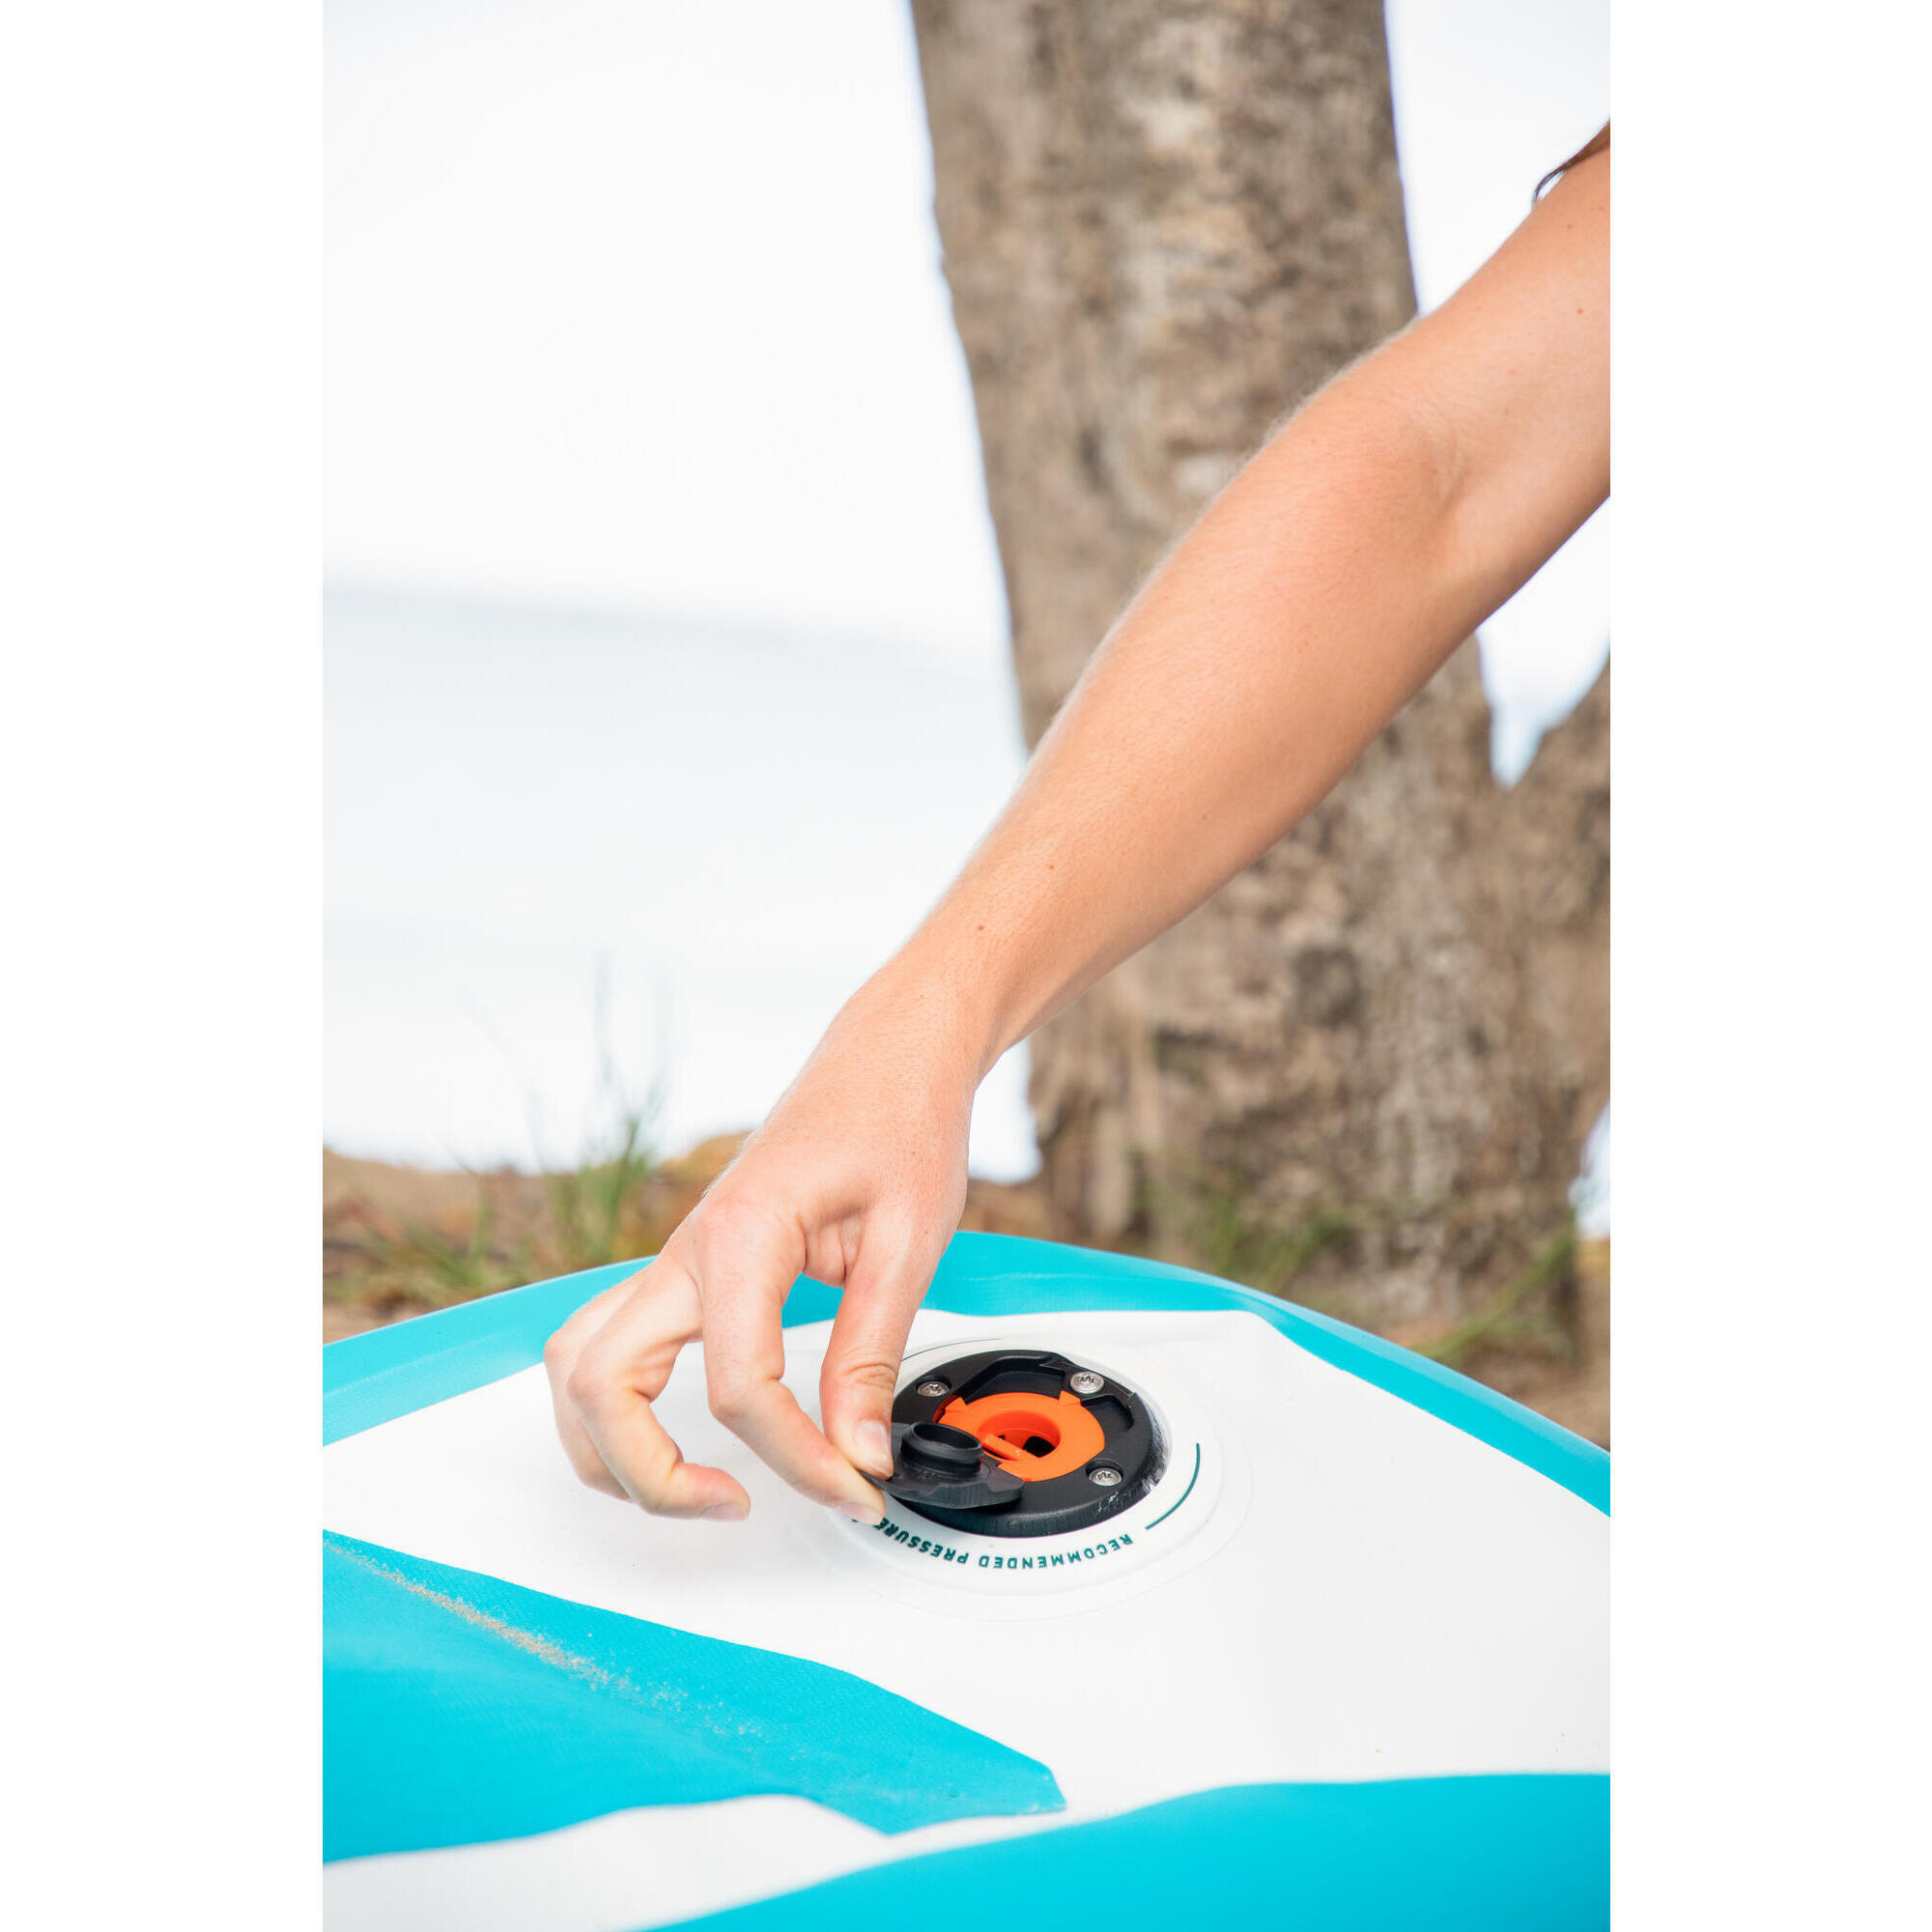 Inflatable Paddle Board - 100 White/Green - ITIWIT